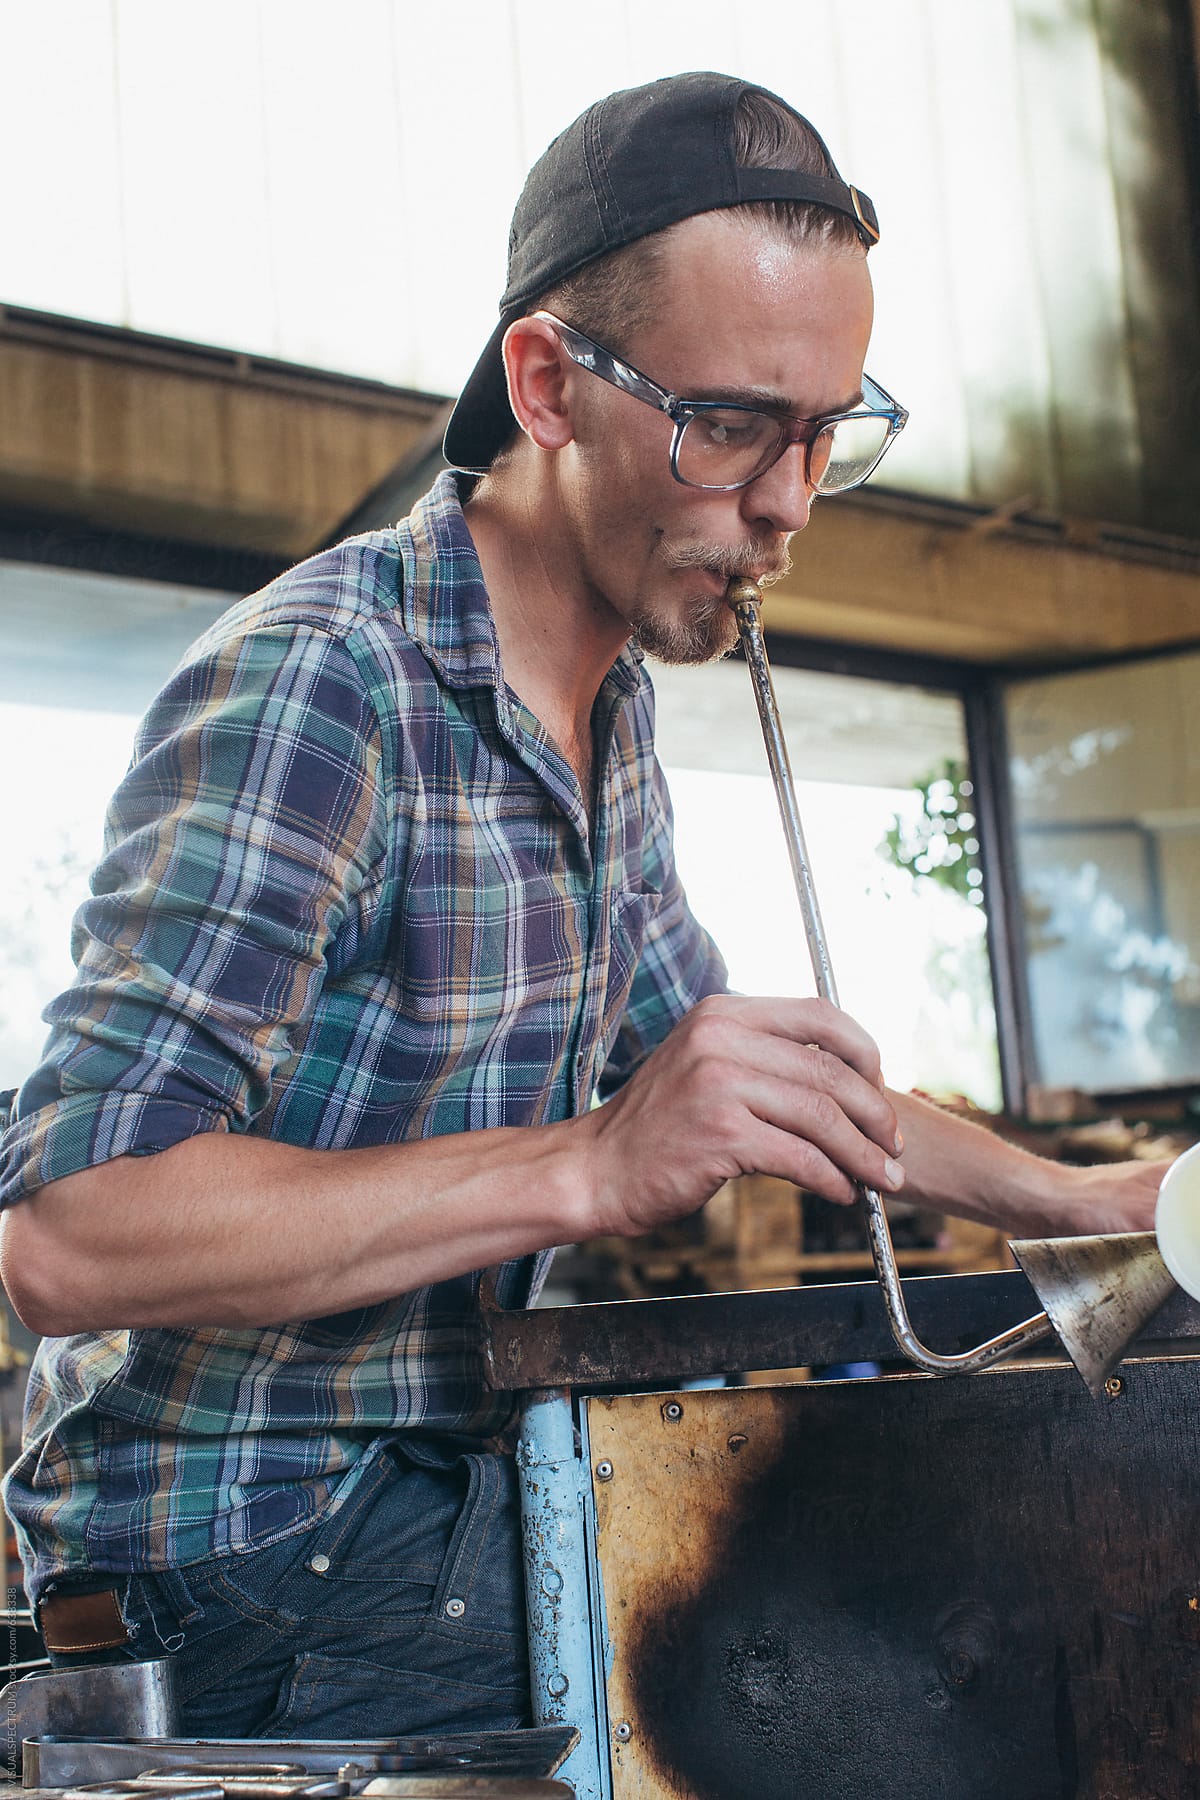 Artisan Glass Workshop - Portrait of Male Hipster Artist Blowing Glass